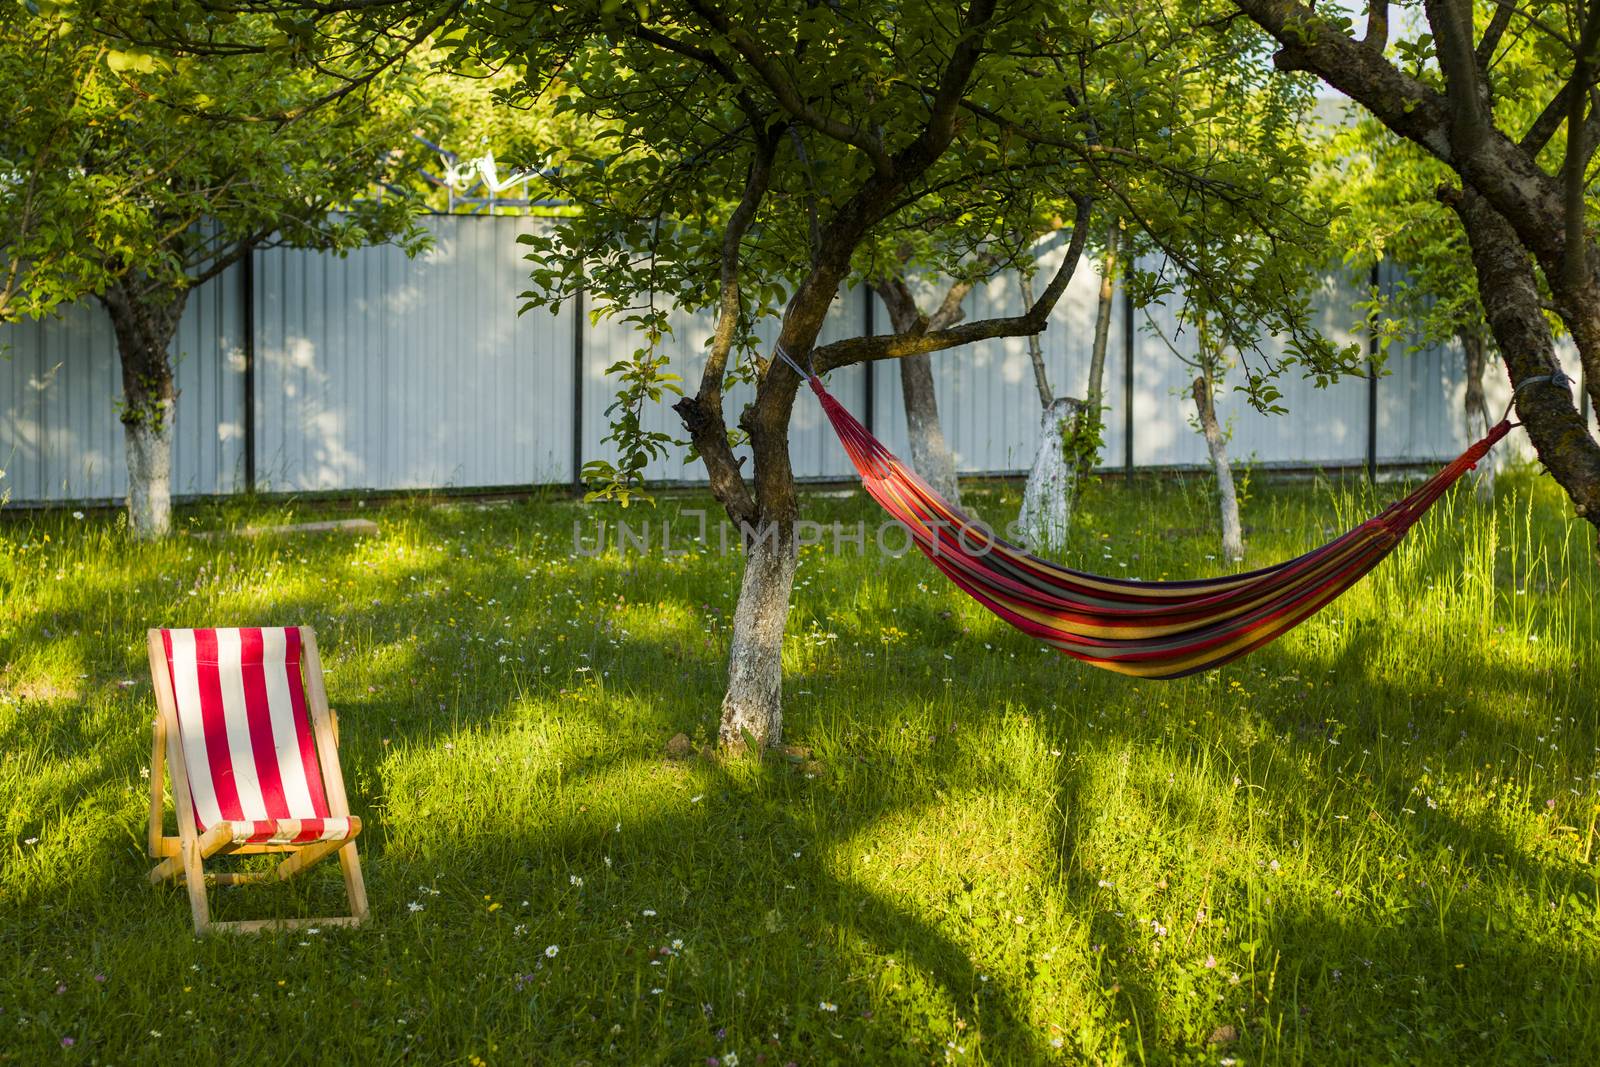 Yard chair on the grass and hammock, summer holiday background. Copy paste space. by Taidundua